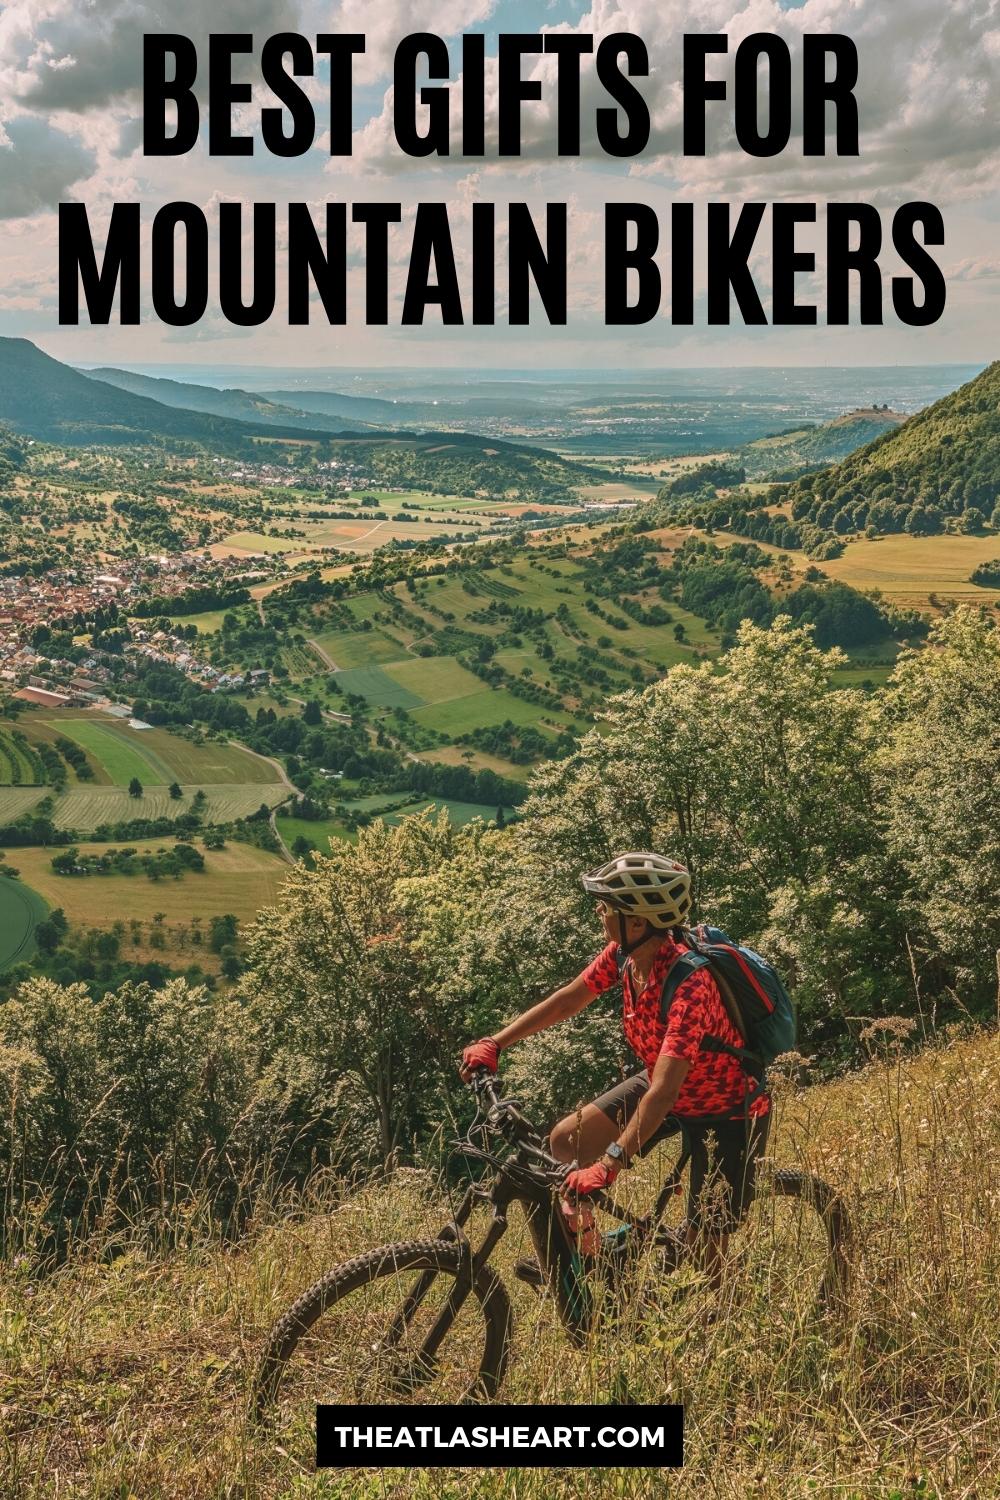 31 Unique & Best Gifts for Mountain Bikers That They\'ll Actually Use